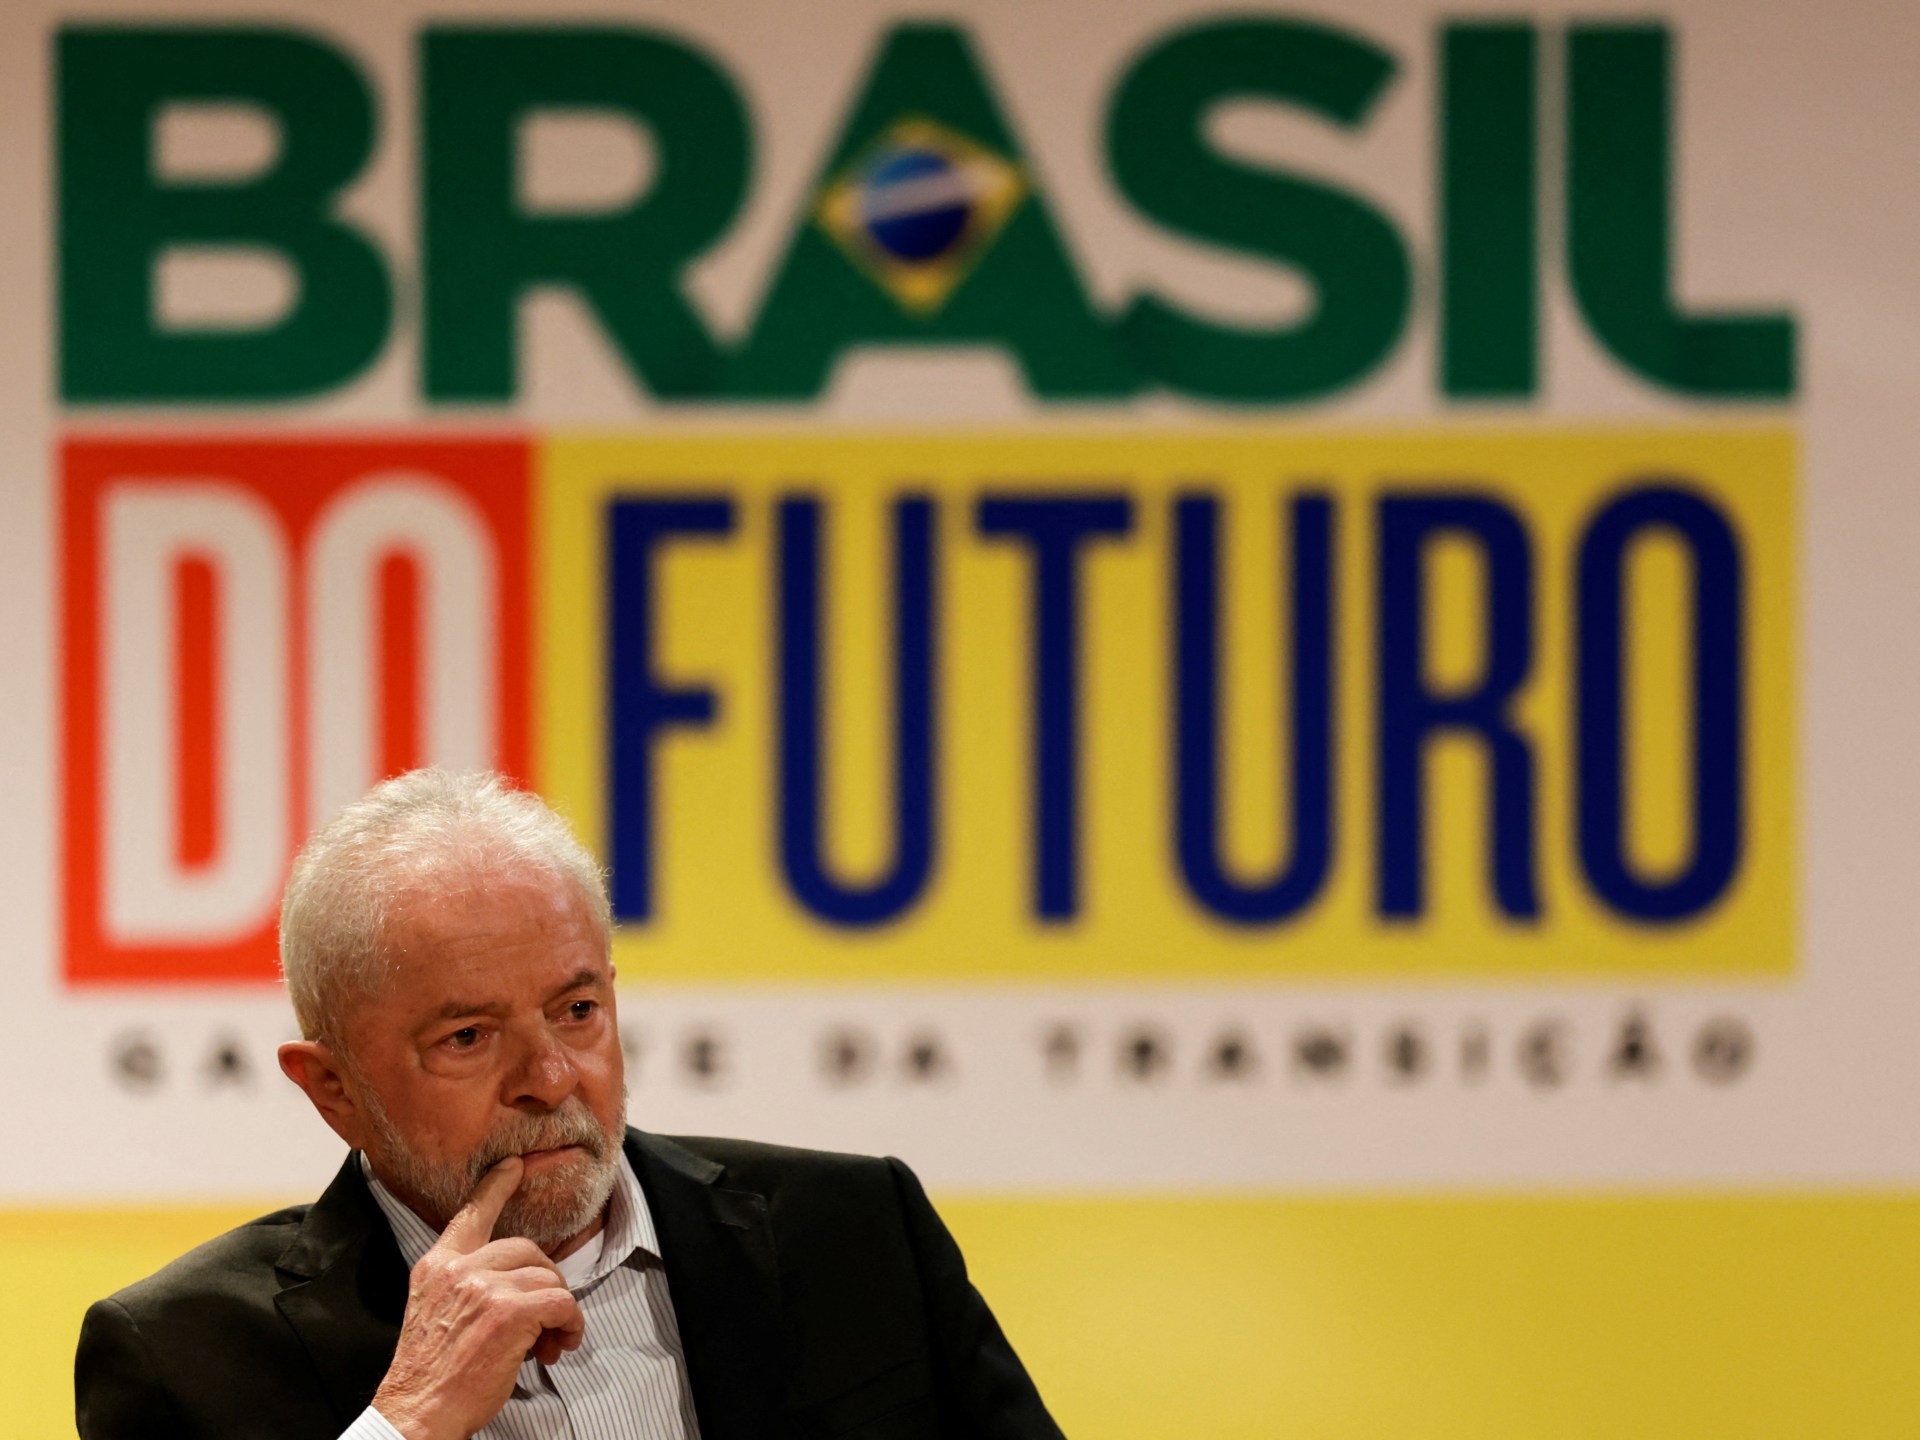 With Lula set to take over, what position can Brazil play on local weather?